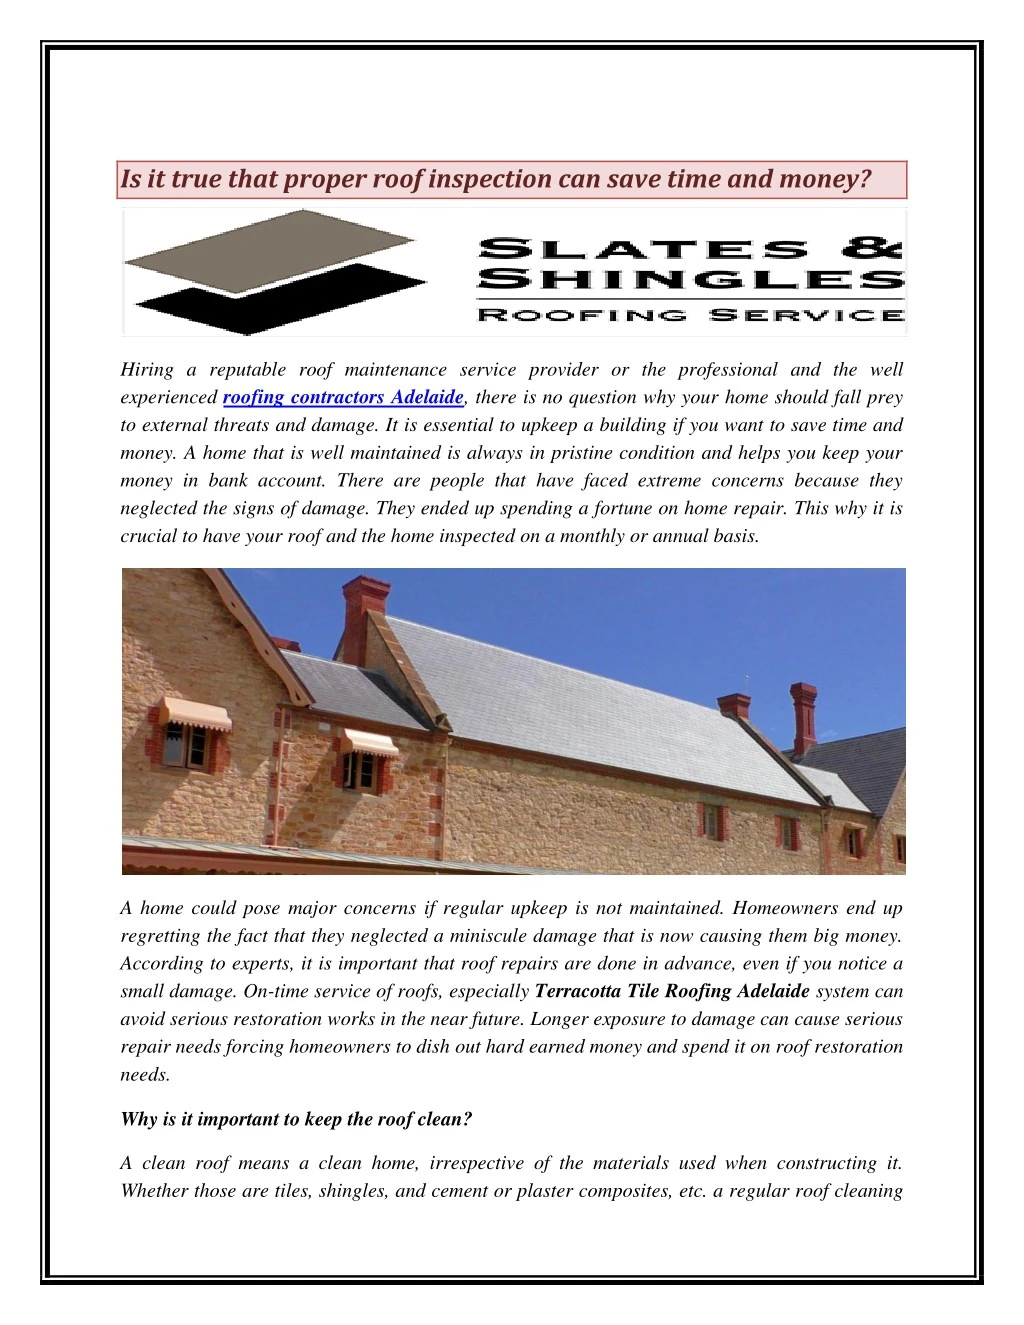 is it true that proper roof inspection can save